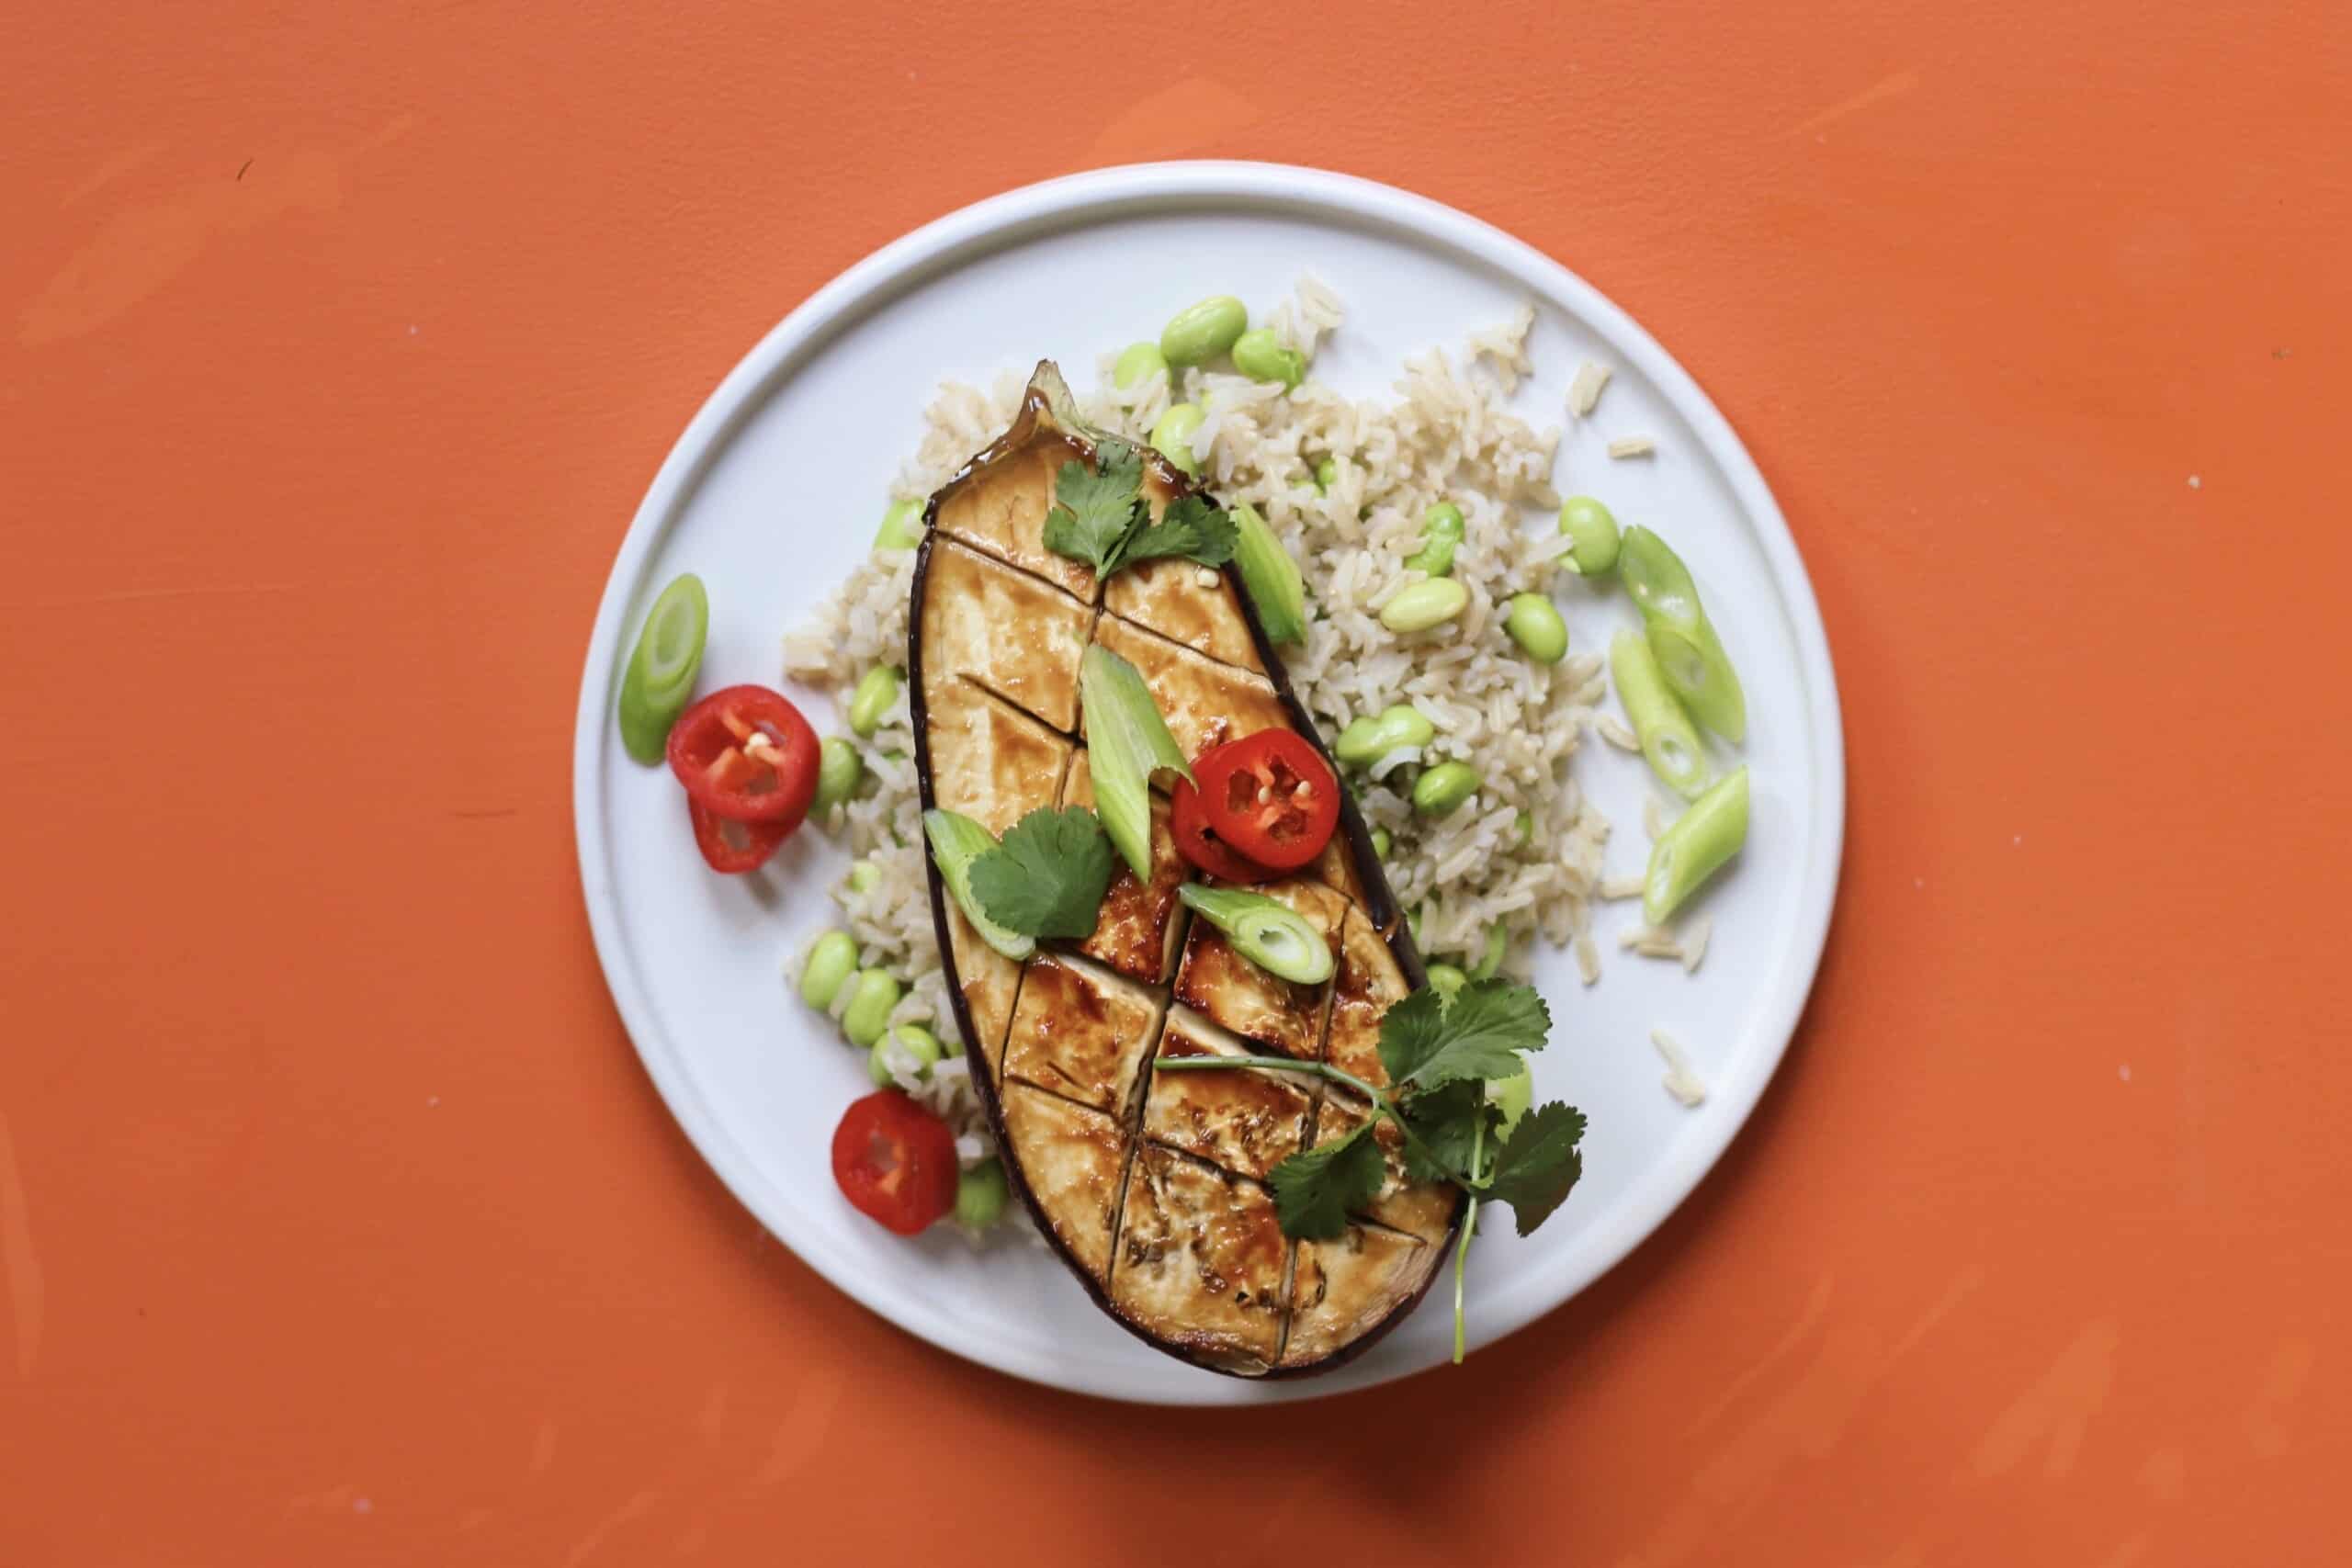 Half a roasted Miso aubergine on a bed of rice with edamame beans and spring onions on a plate on an orange background.